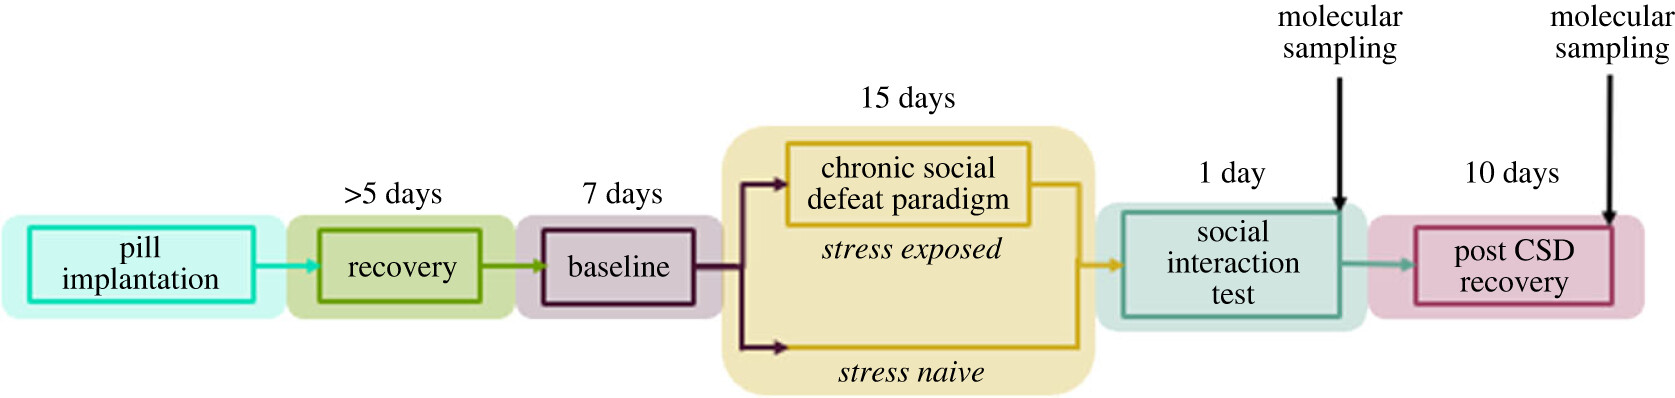 Timeline for investigating the association between stress, diurnal temperature rhythms and changes in expression of thermosensitive genes (Figure 1 doi.org/10.1098/rsob.220380)